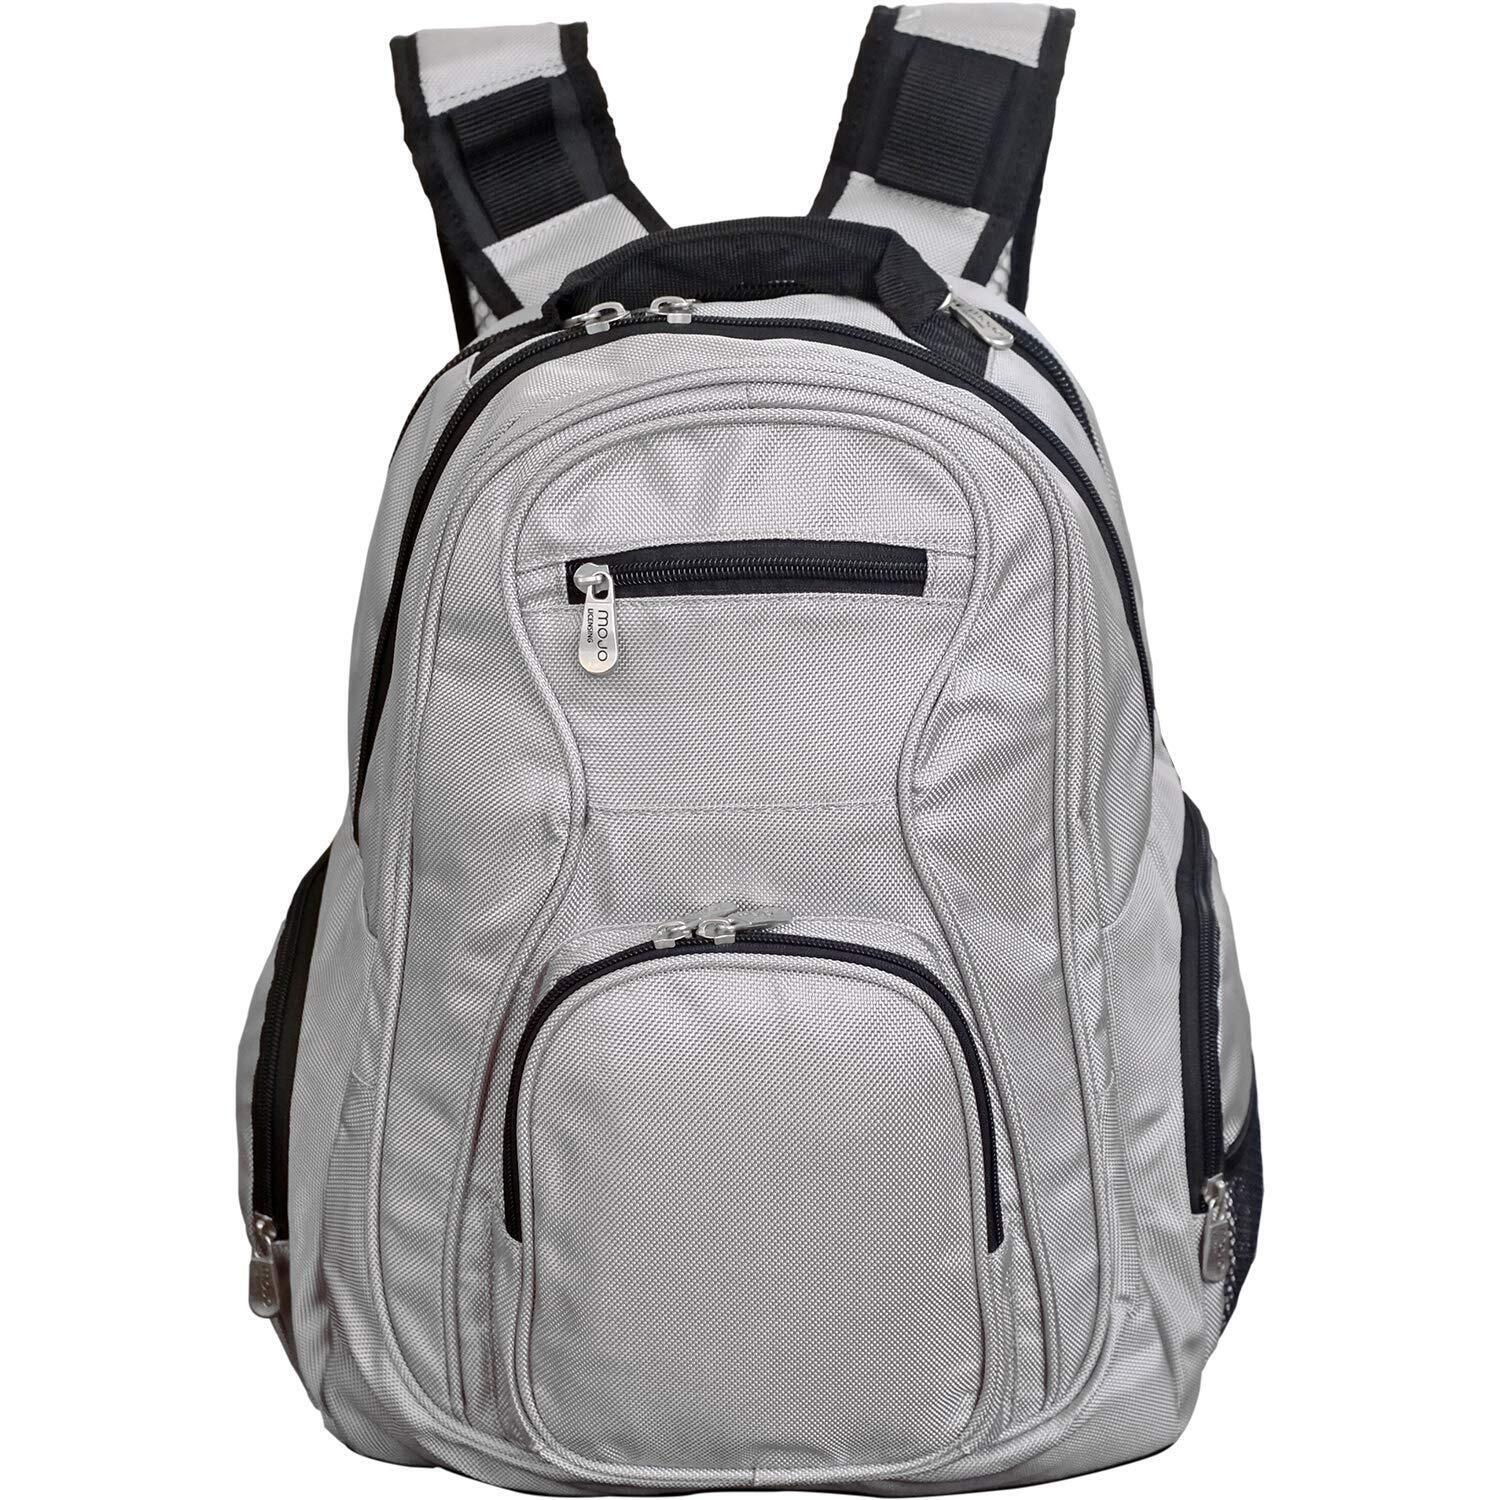 Denco Voyager Laptop Backpack, 19-inches, Grey